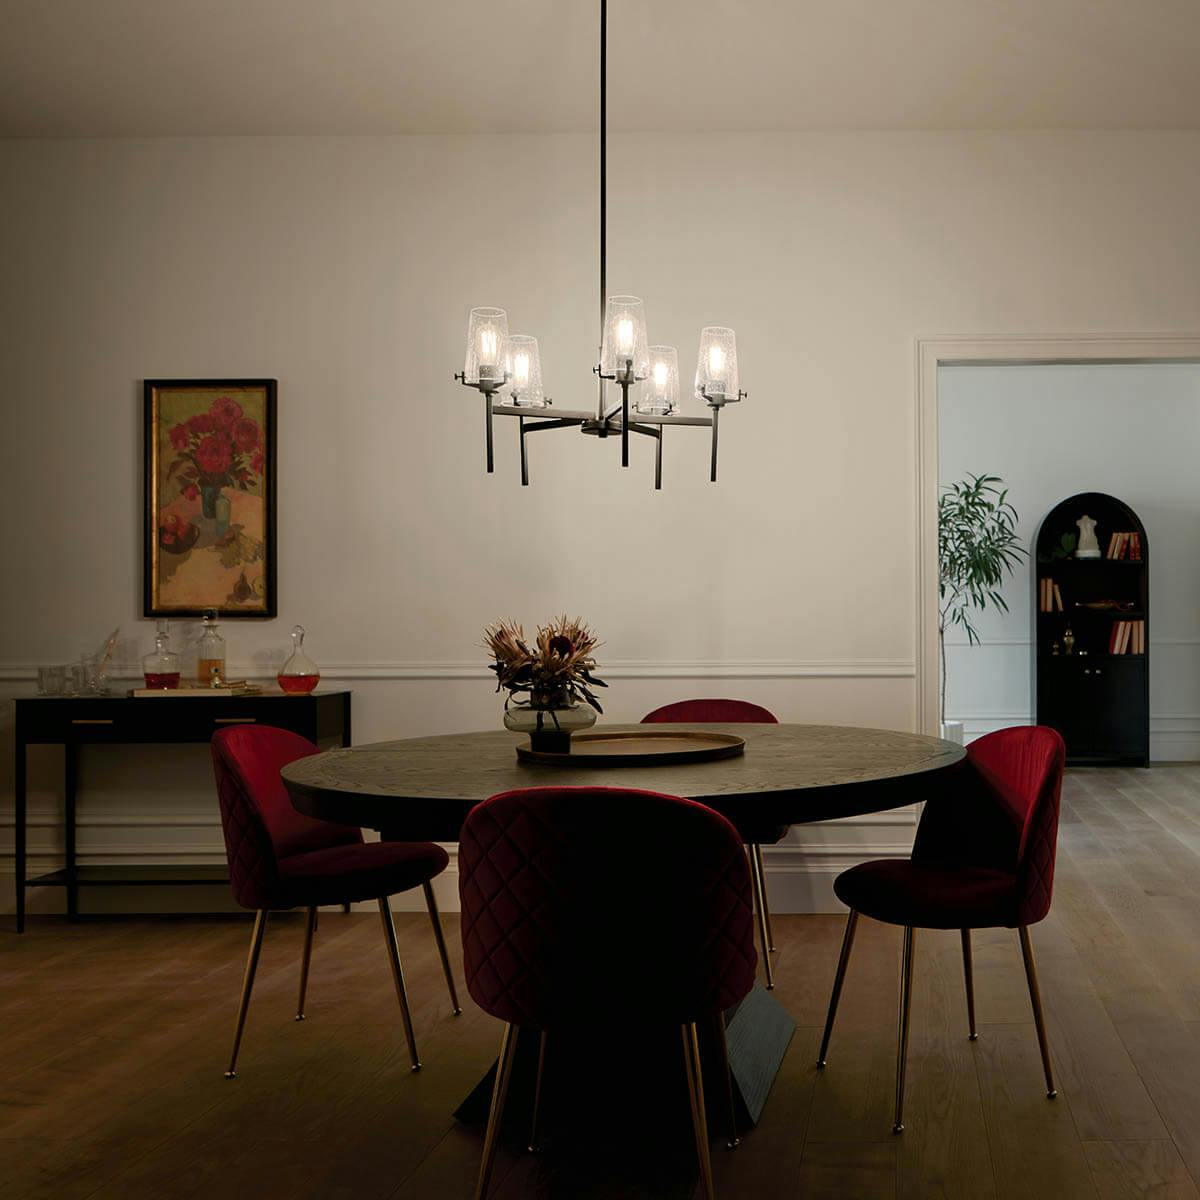 Night time dining room with Alton chandelier in black